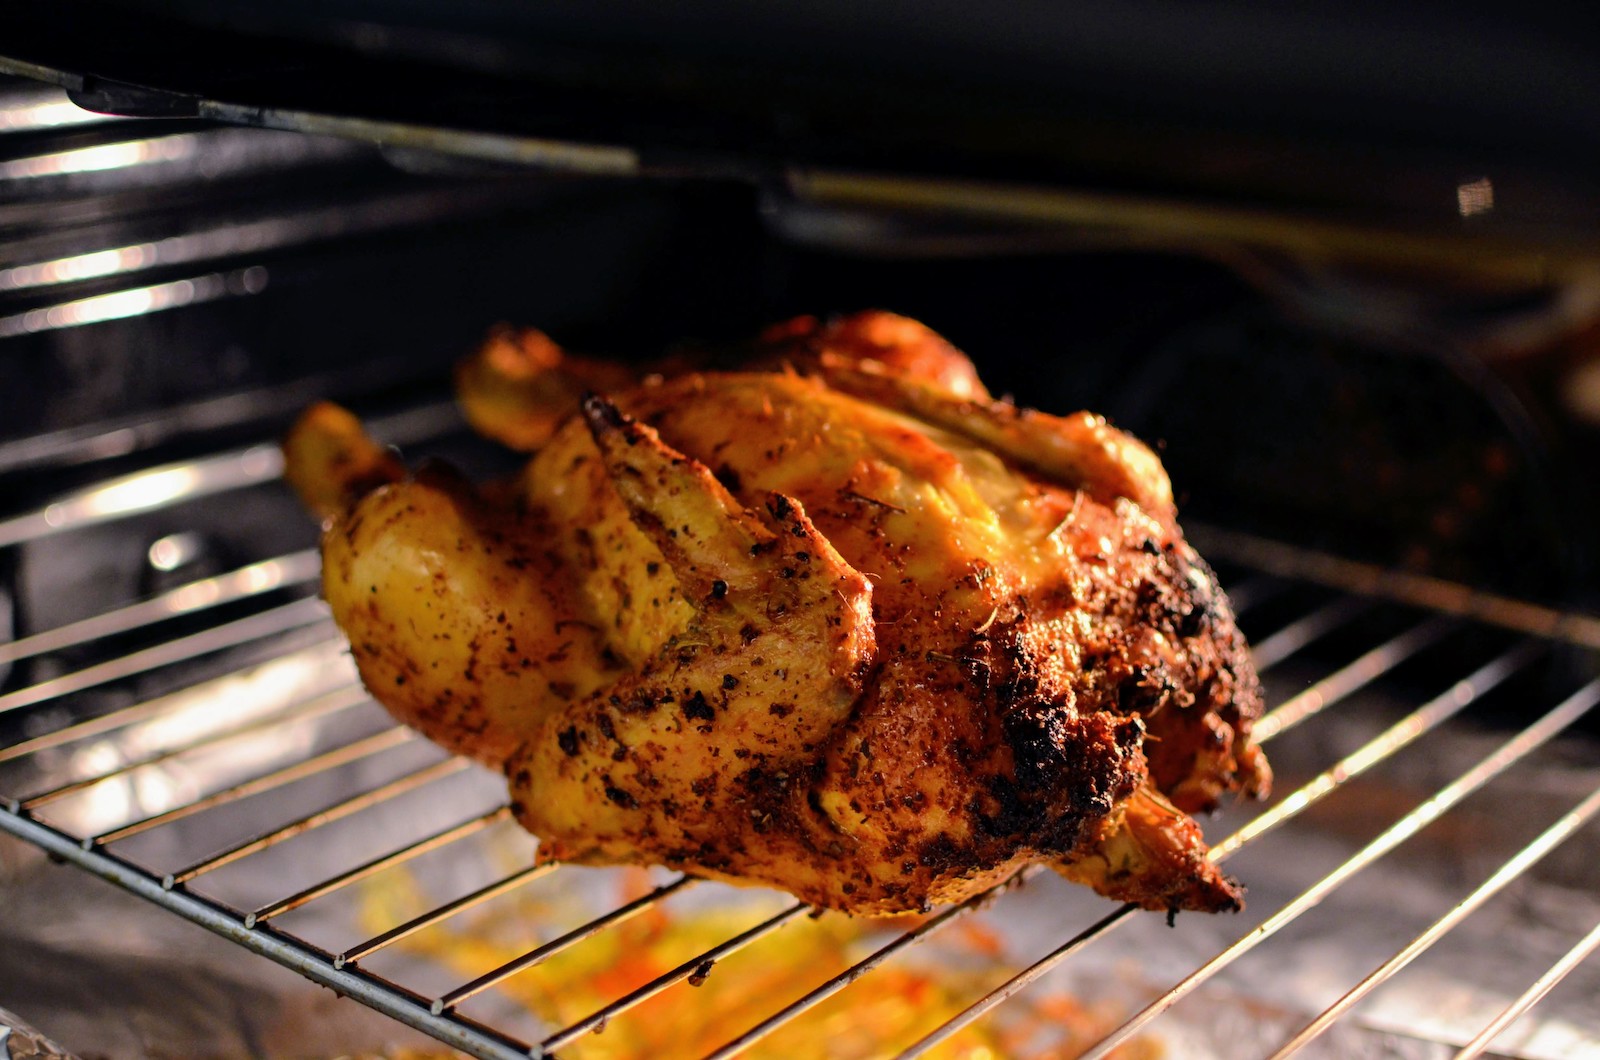 Roasted chicken out of oven